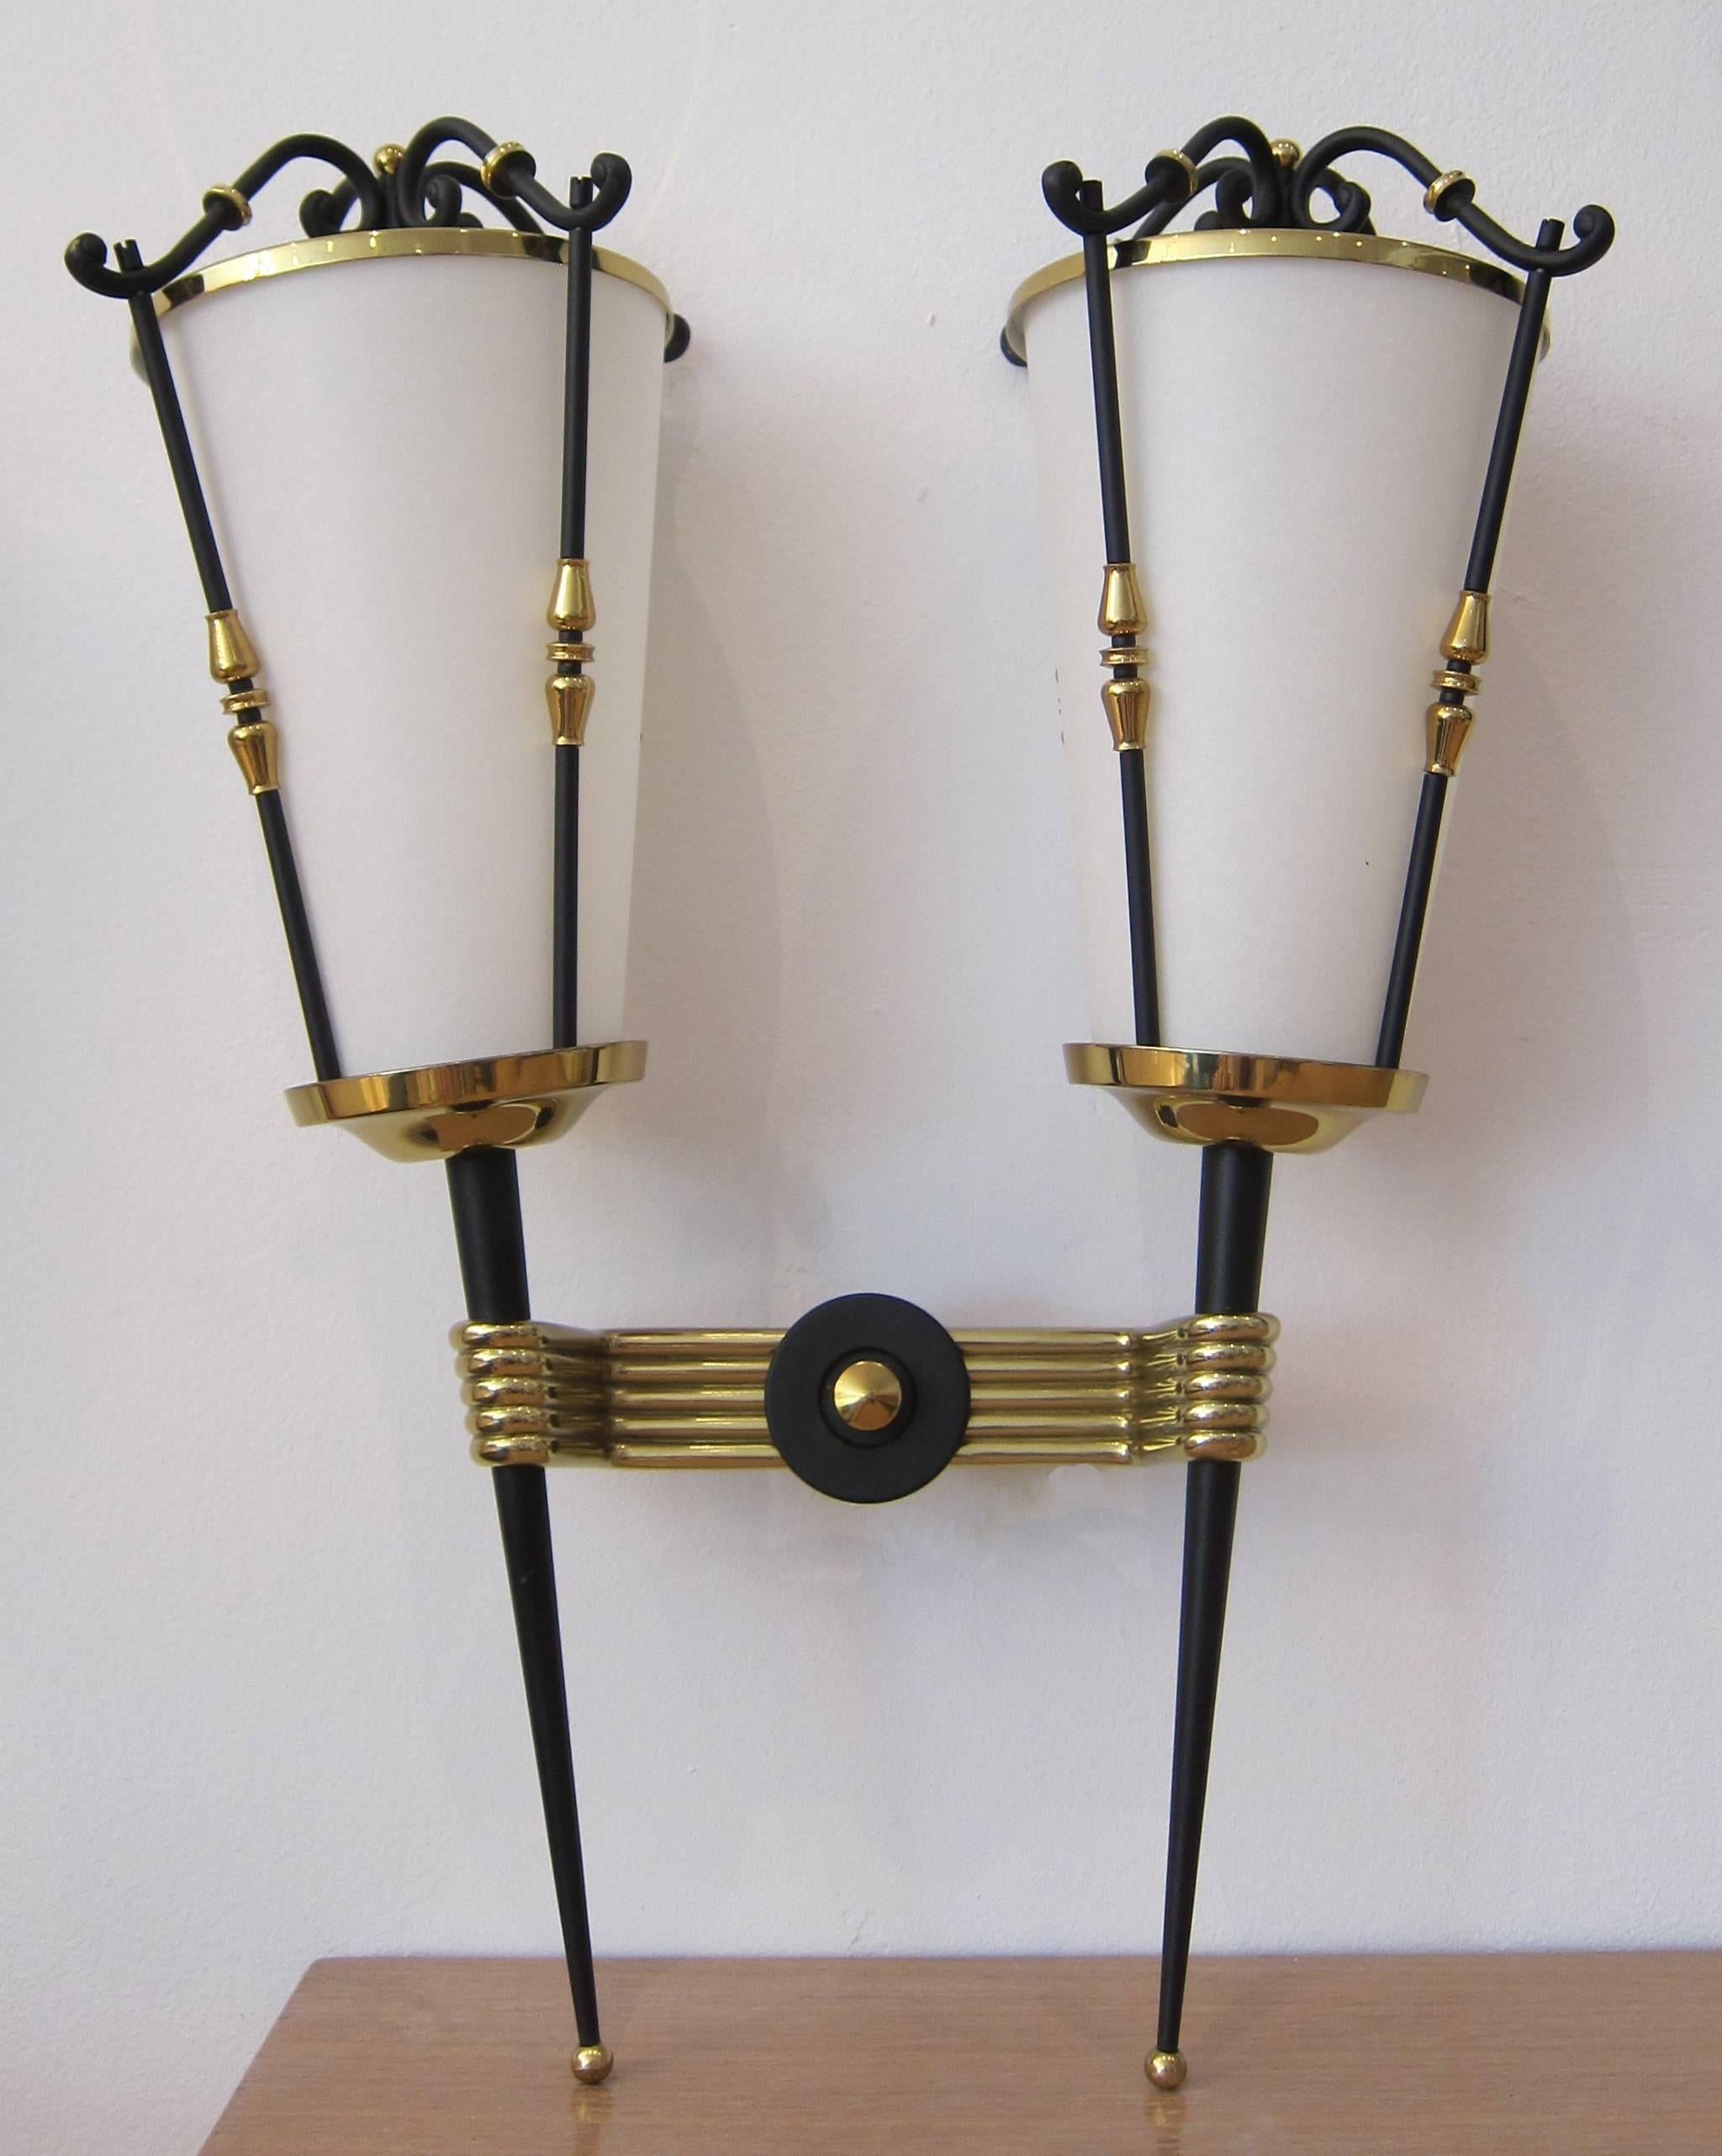 Pair of double arm lantern wall sconces. Brass and black painted metal with perforated tops. Completely redone to perfection including new parchment shades.